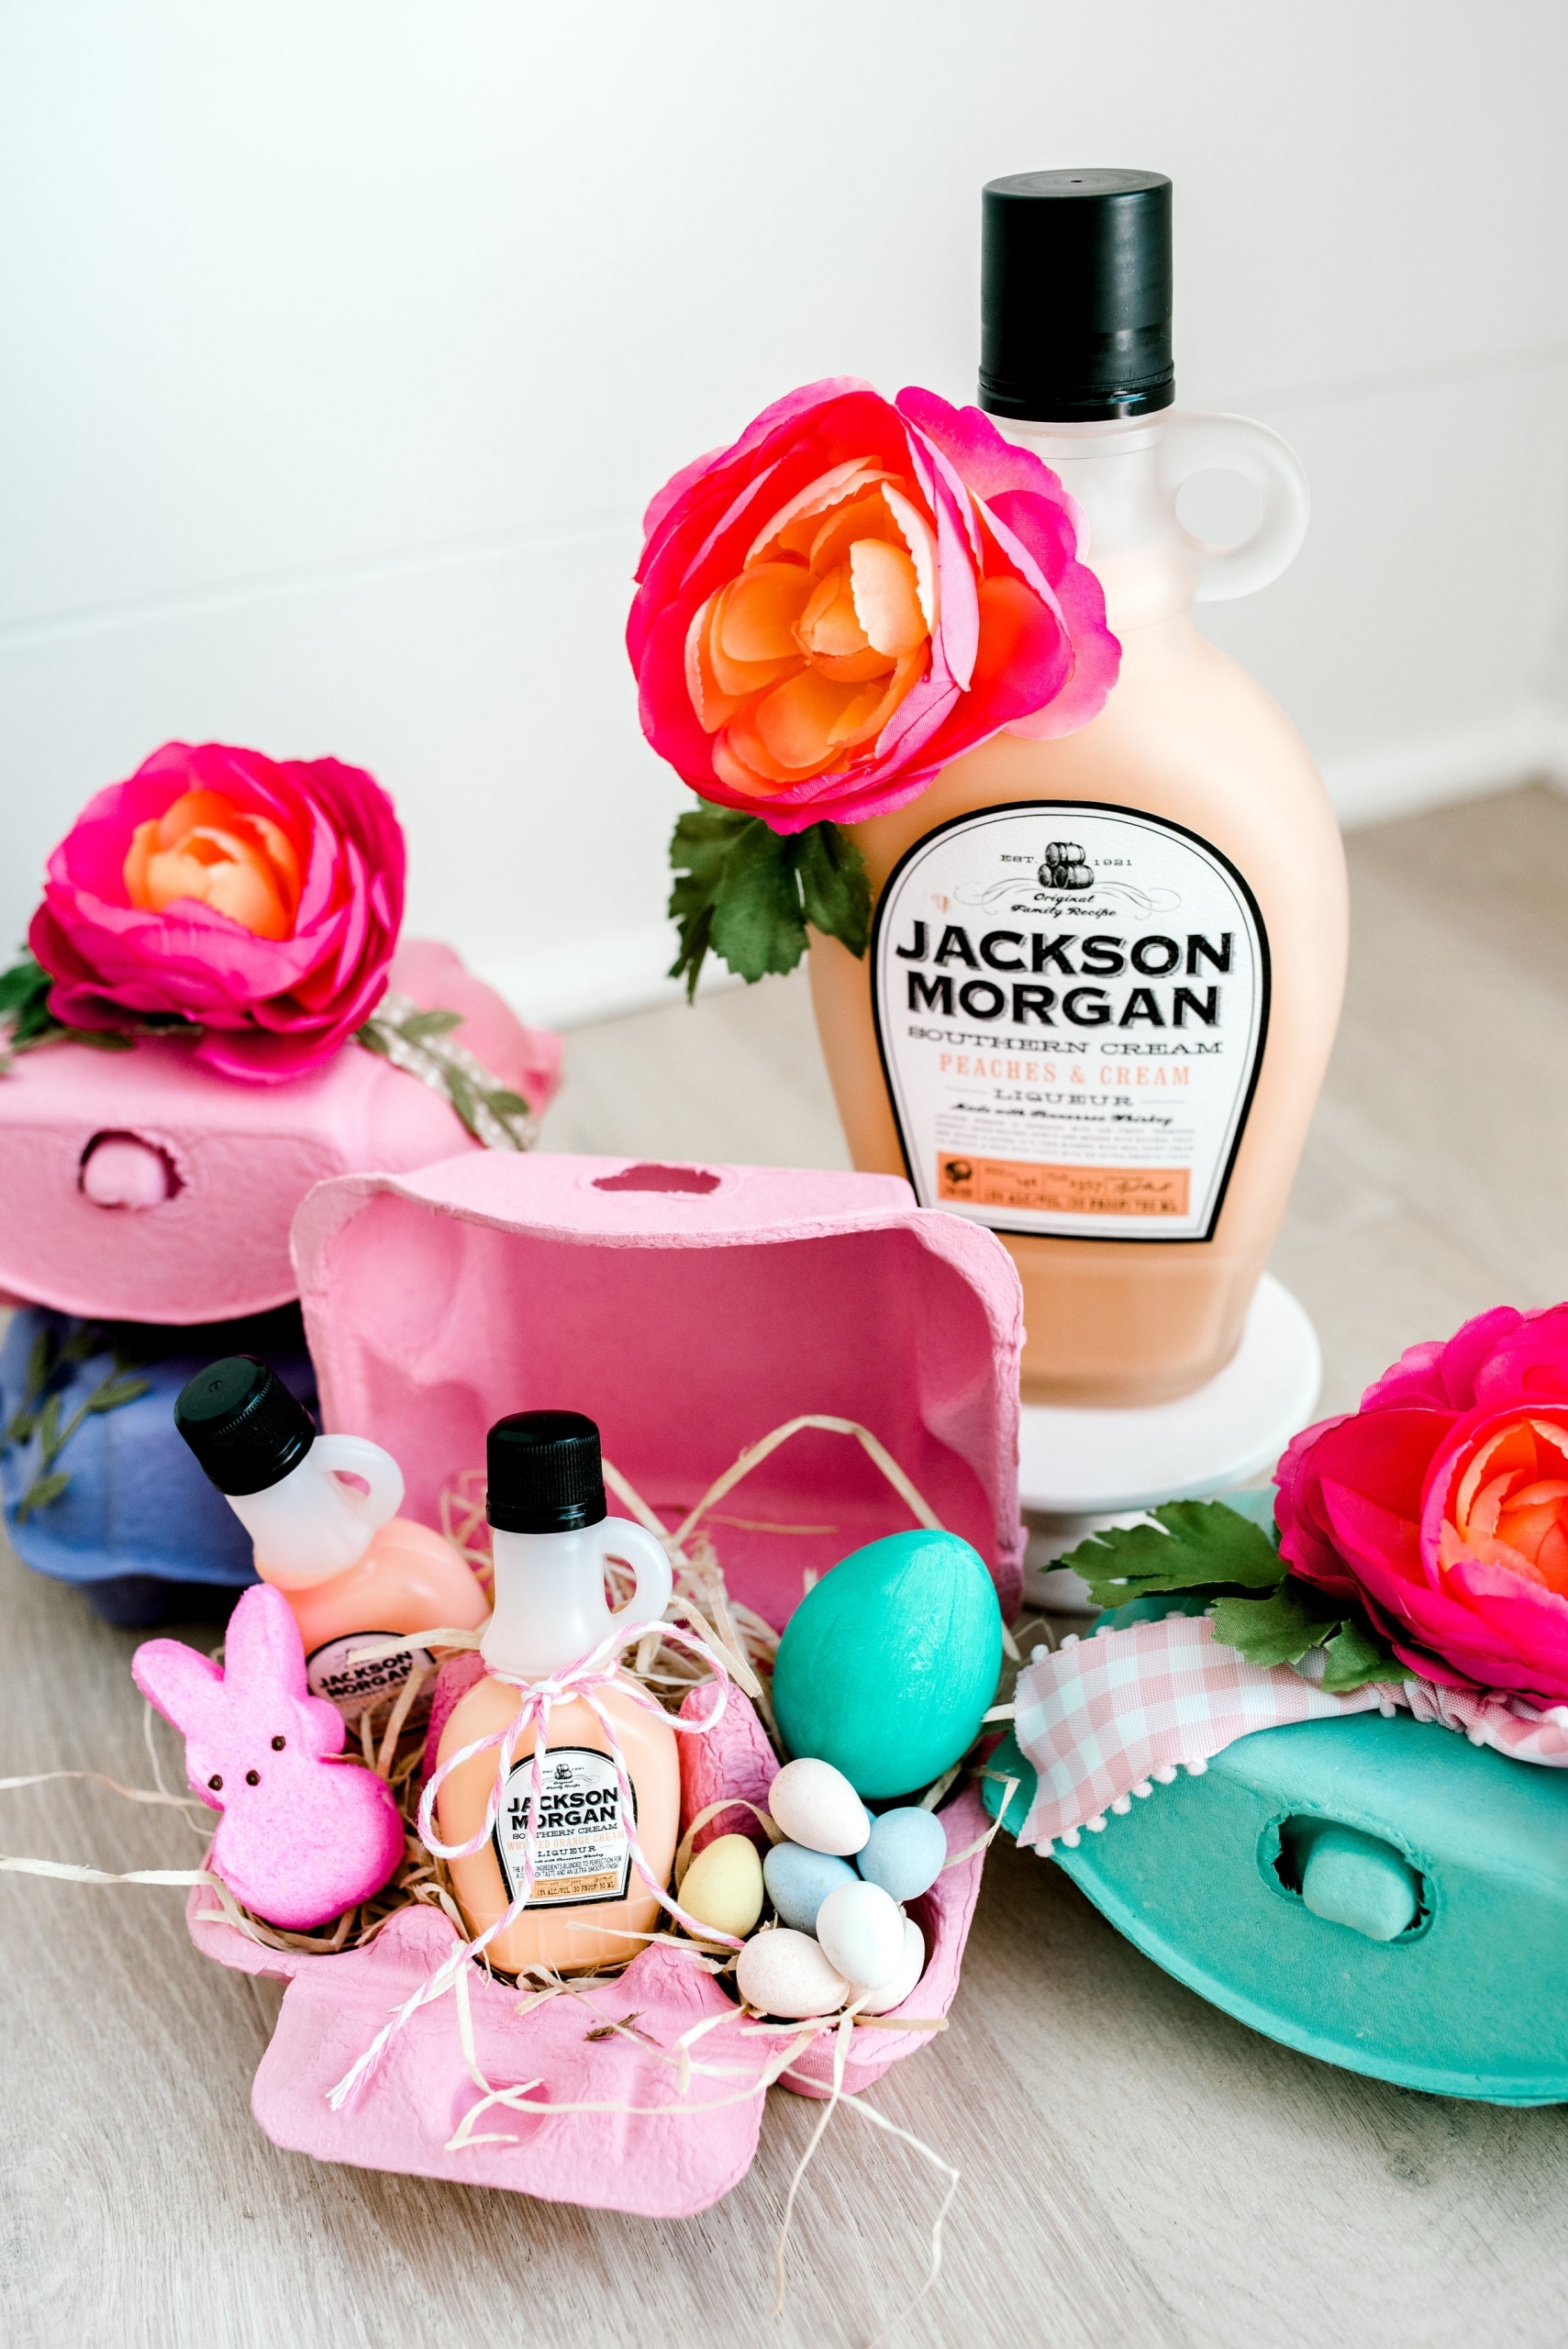 Cute and creative crate gifties with Jackson Morgan.